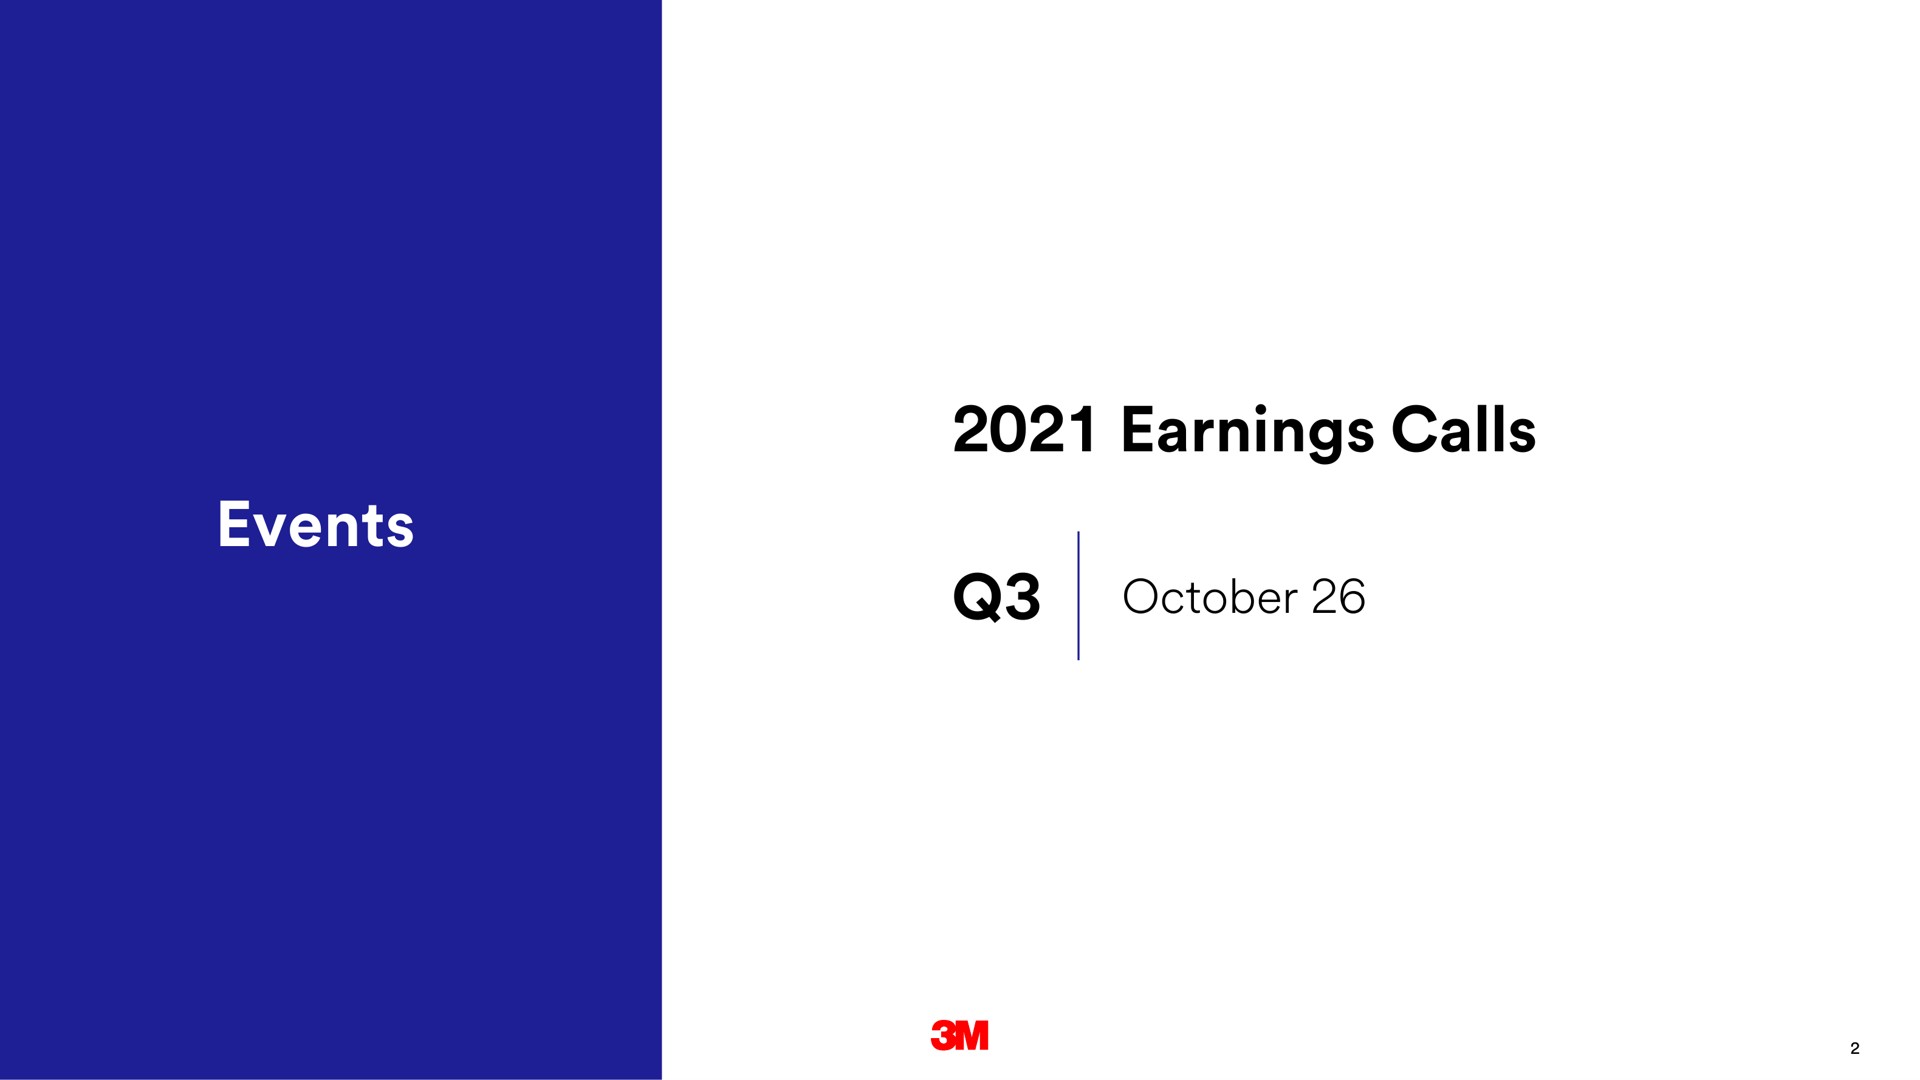 events earnings calls | 3M